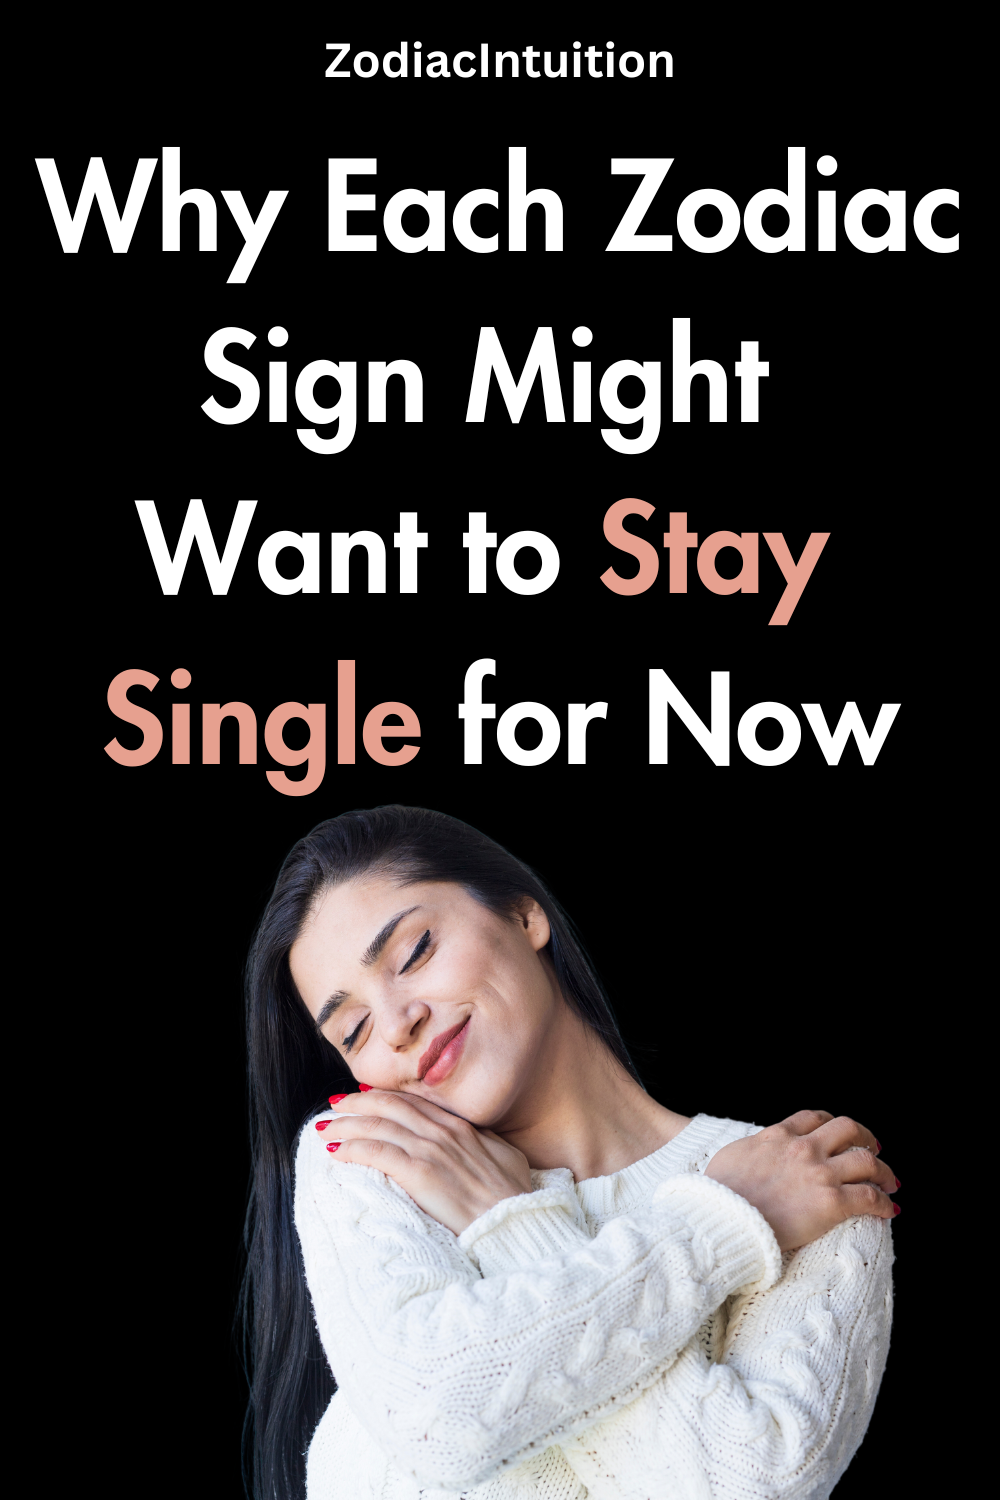 Why Each Zodiac Sign Might Want to Stay Single for Now